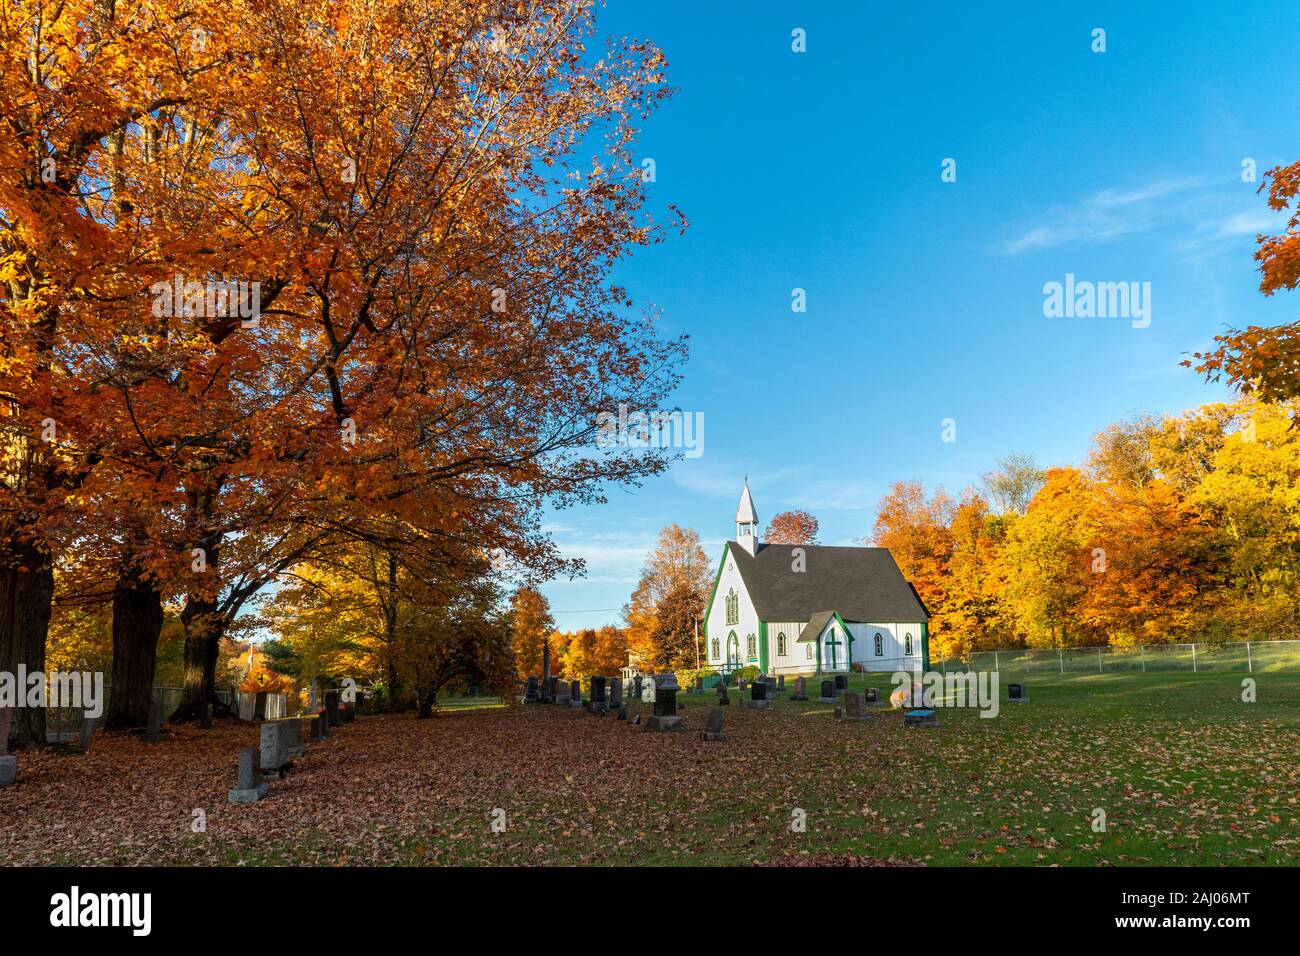 Along Chemin d'Iron Hill (Iron Hill Road). Holy Trinity Anglican Church. Iron Hill, Lac-Brome, Quebec, Canada. Stock Photo